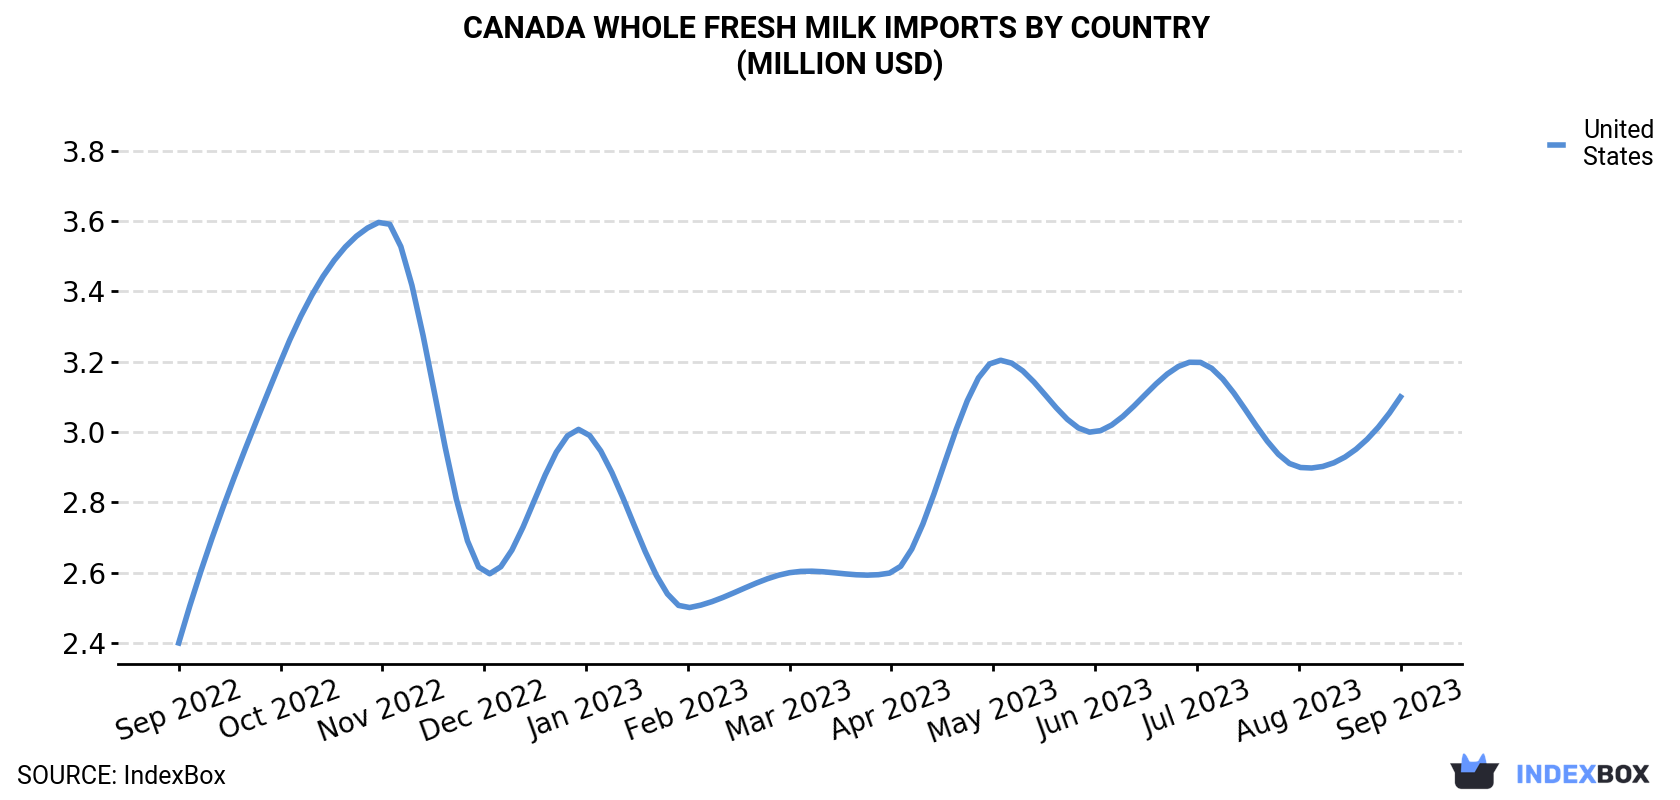 Canada Whole Fresh Milk Imports By Country (Million USD)